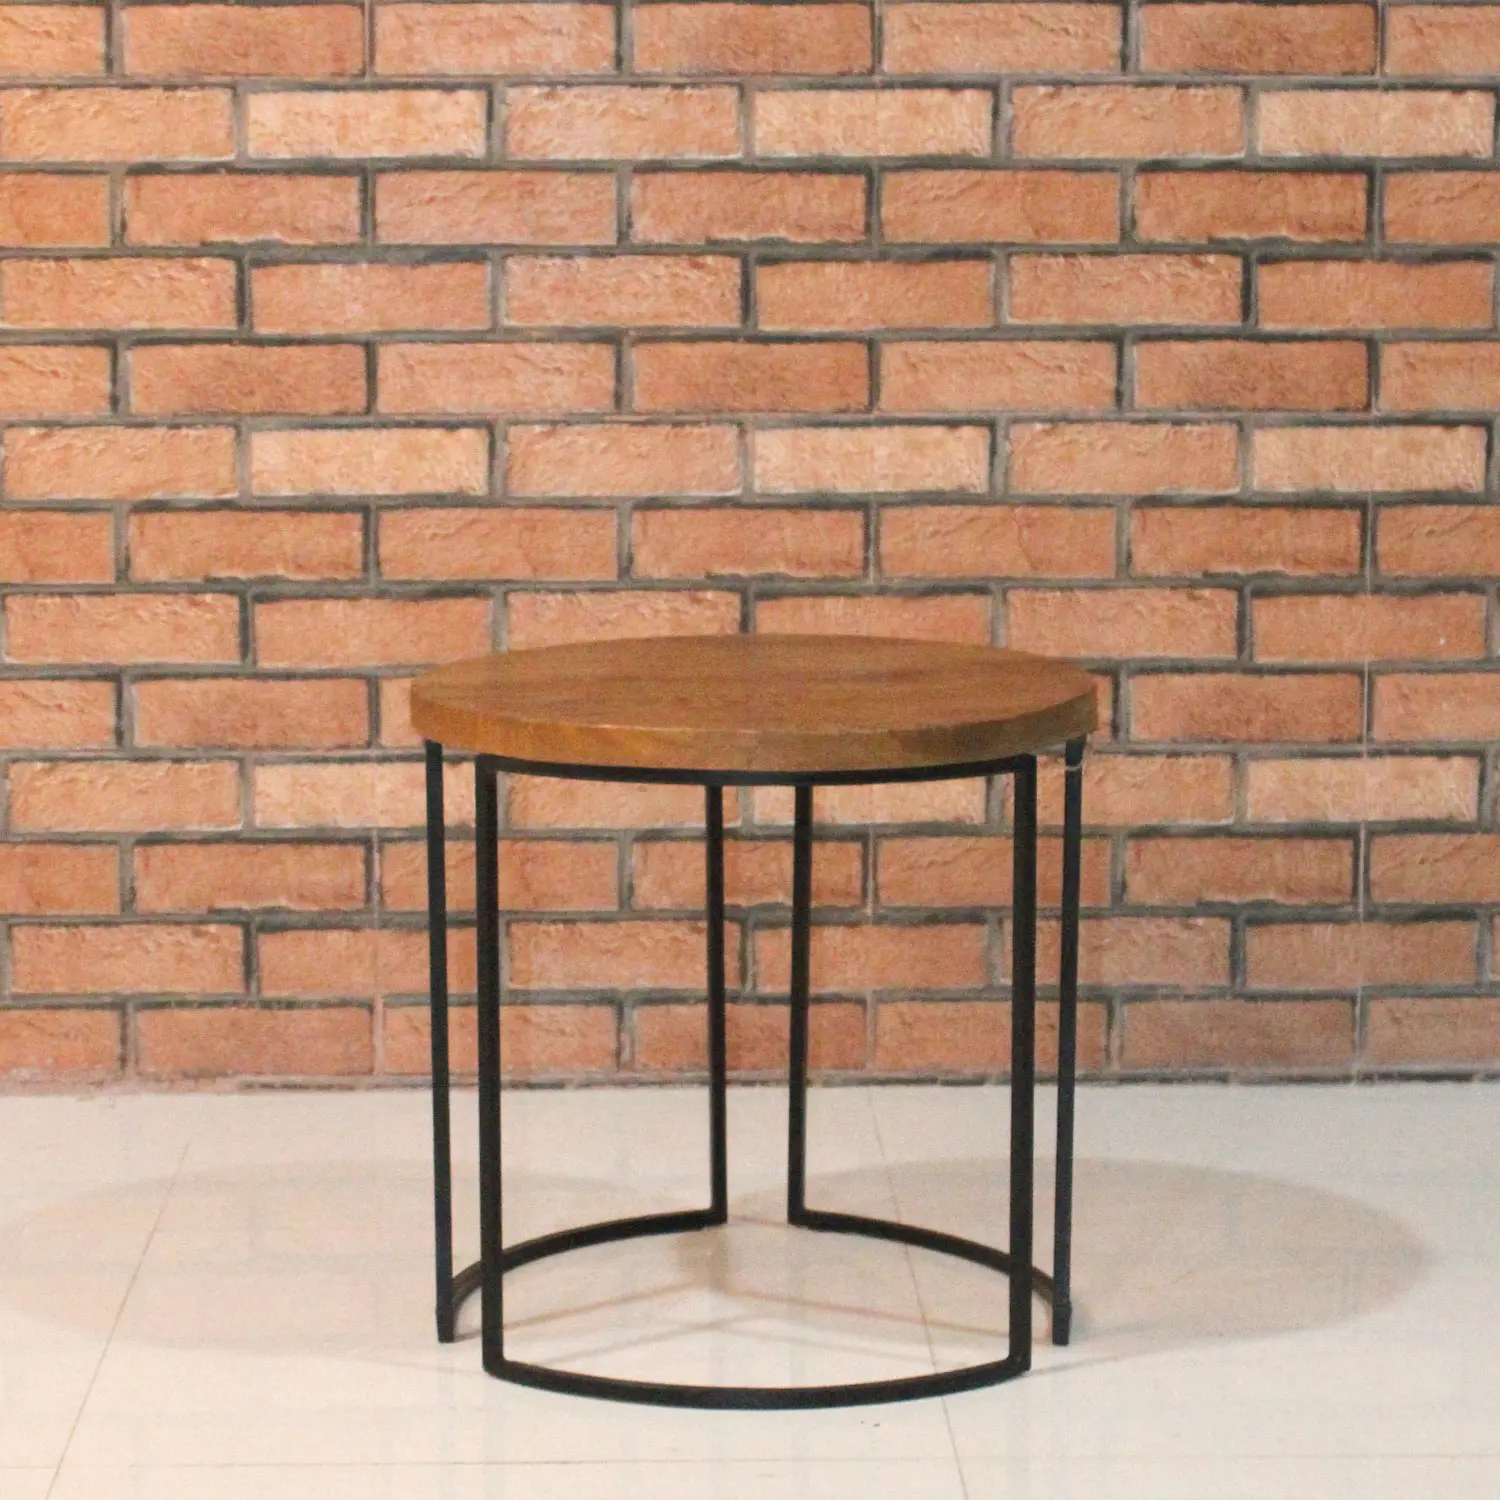 Iron Round Coffee Table with Wooden Top (Knock Down) - popular handicrafts